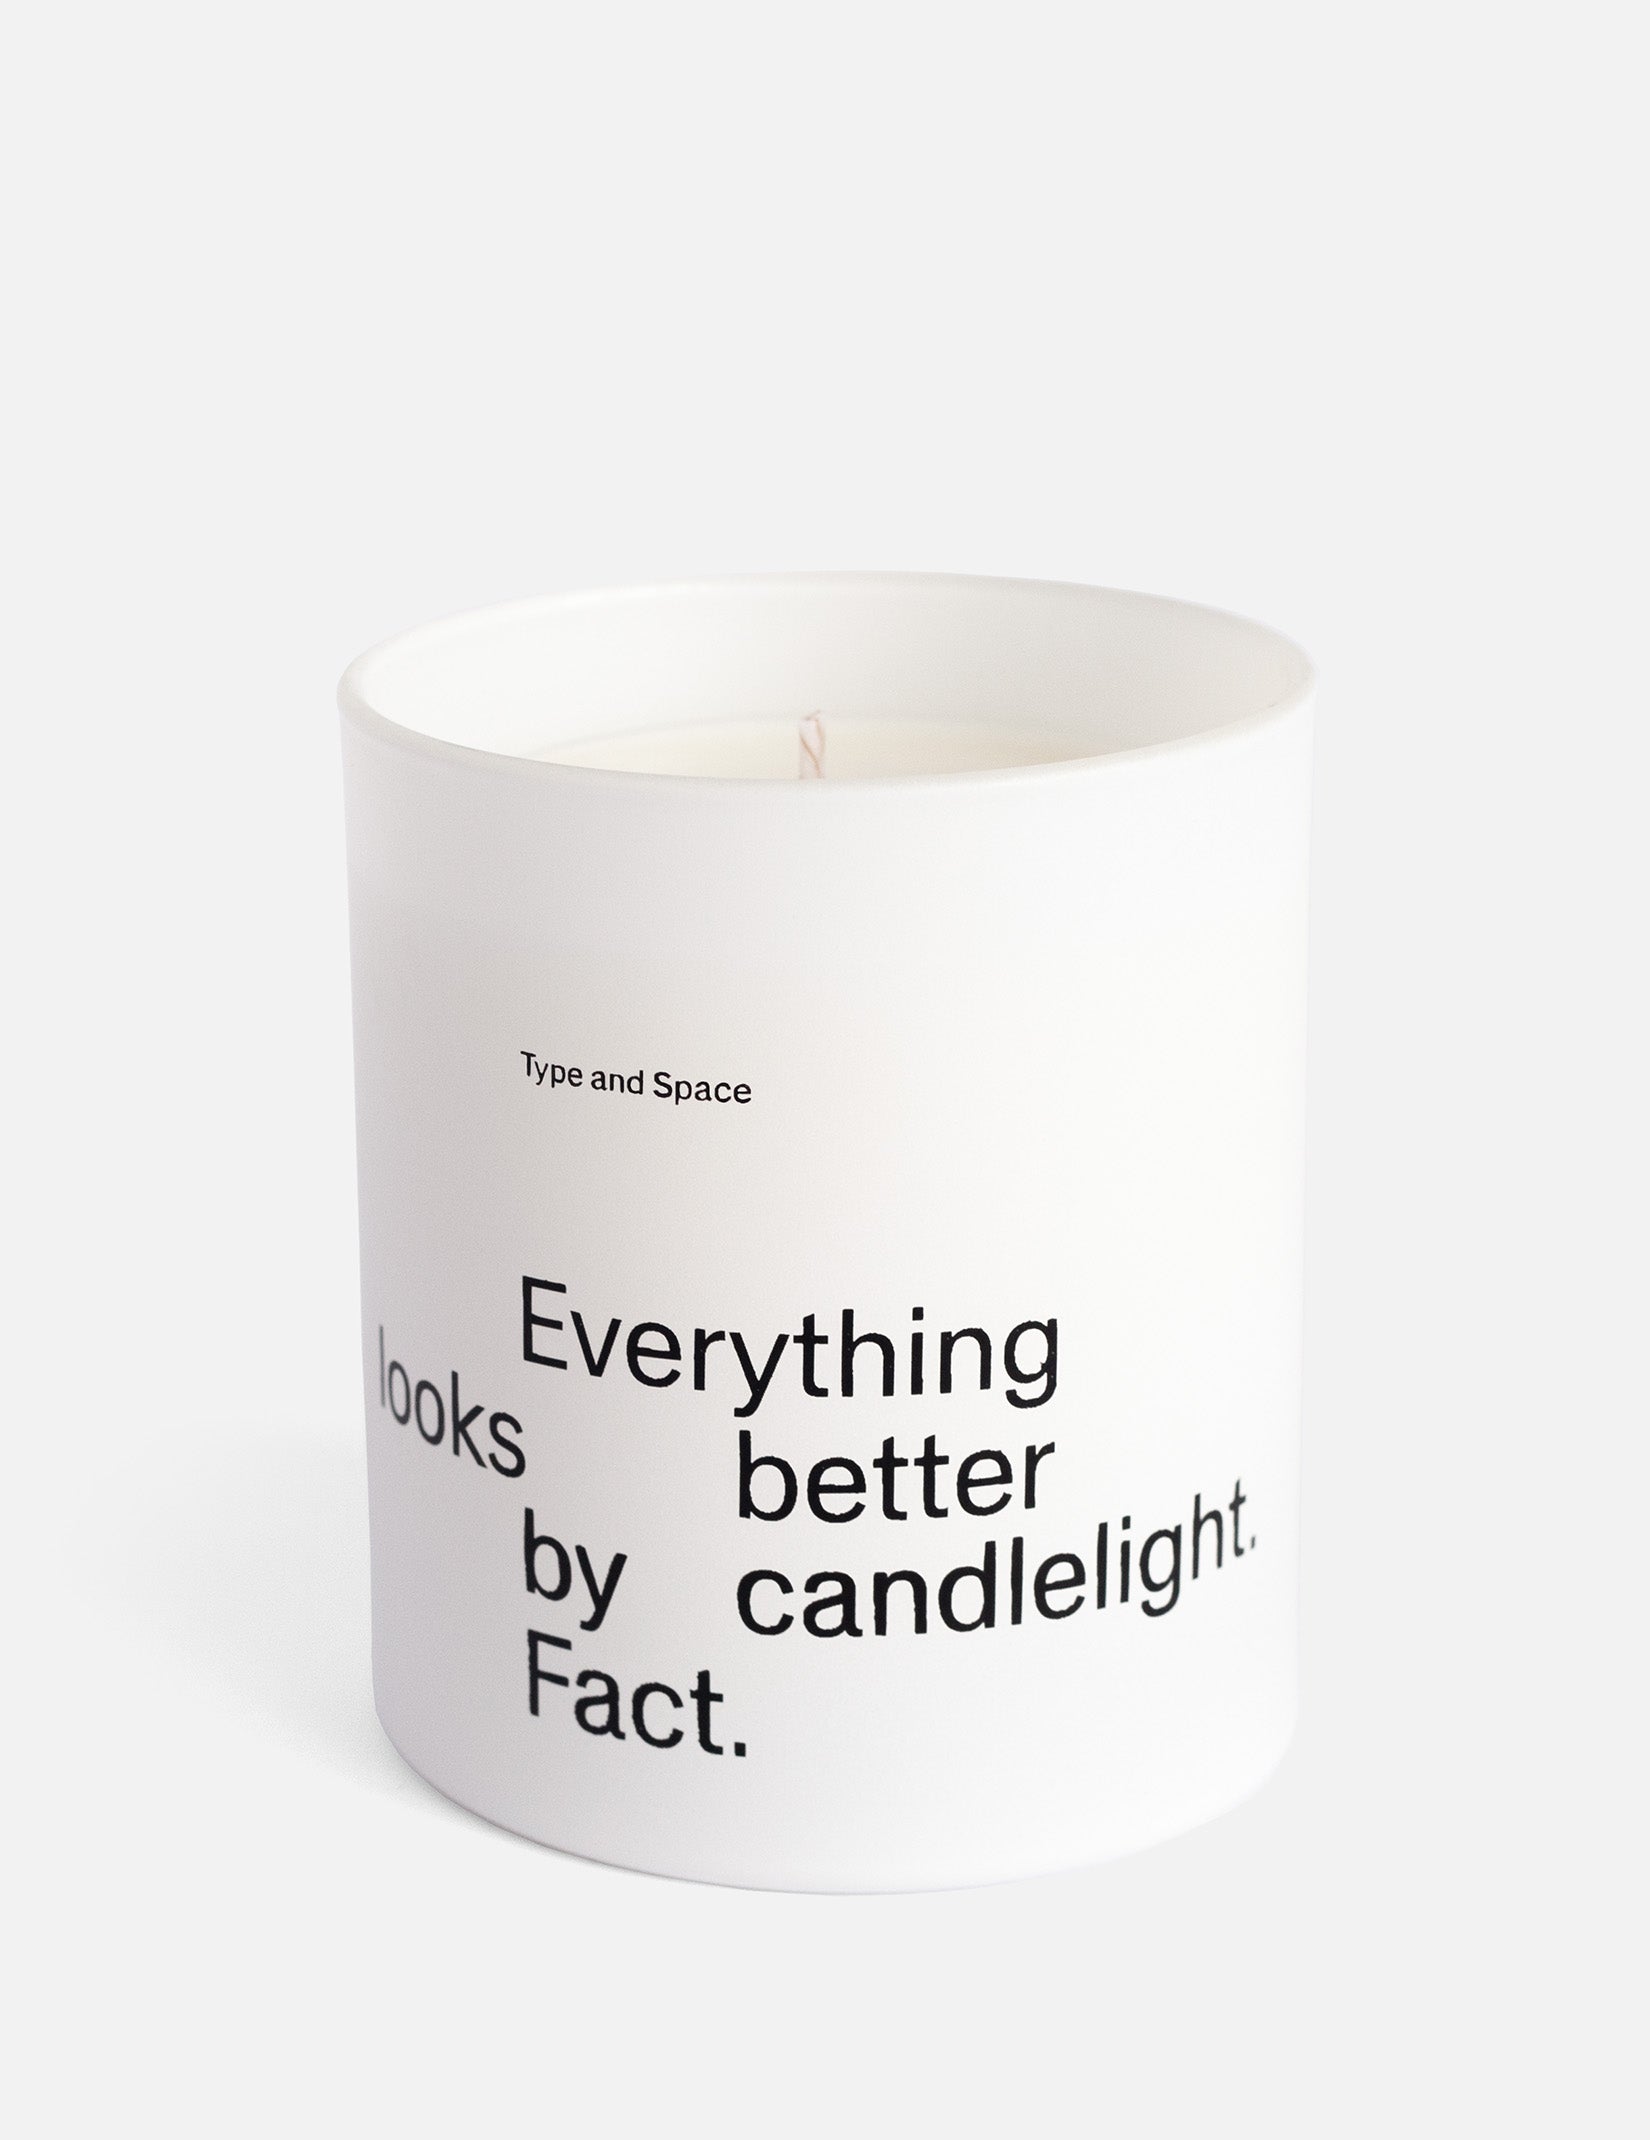 Candle Type 01. By Candlelight print. White. Limited edition. Type and Space